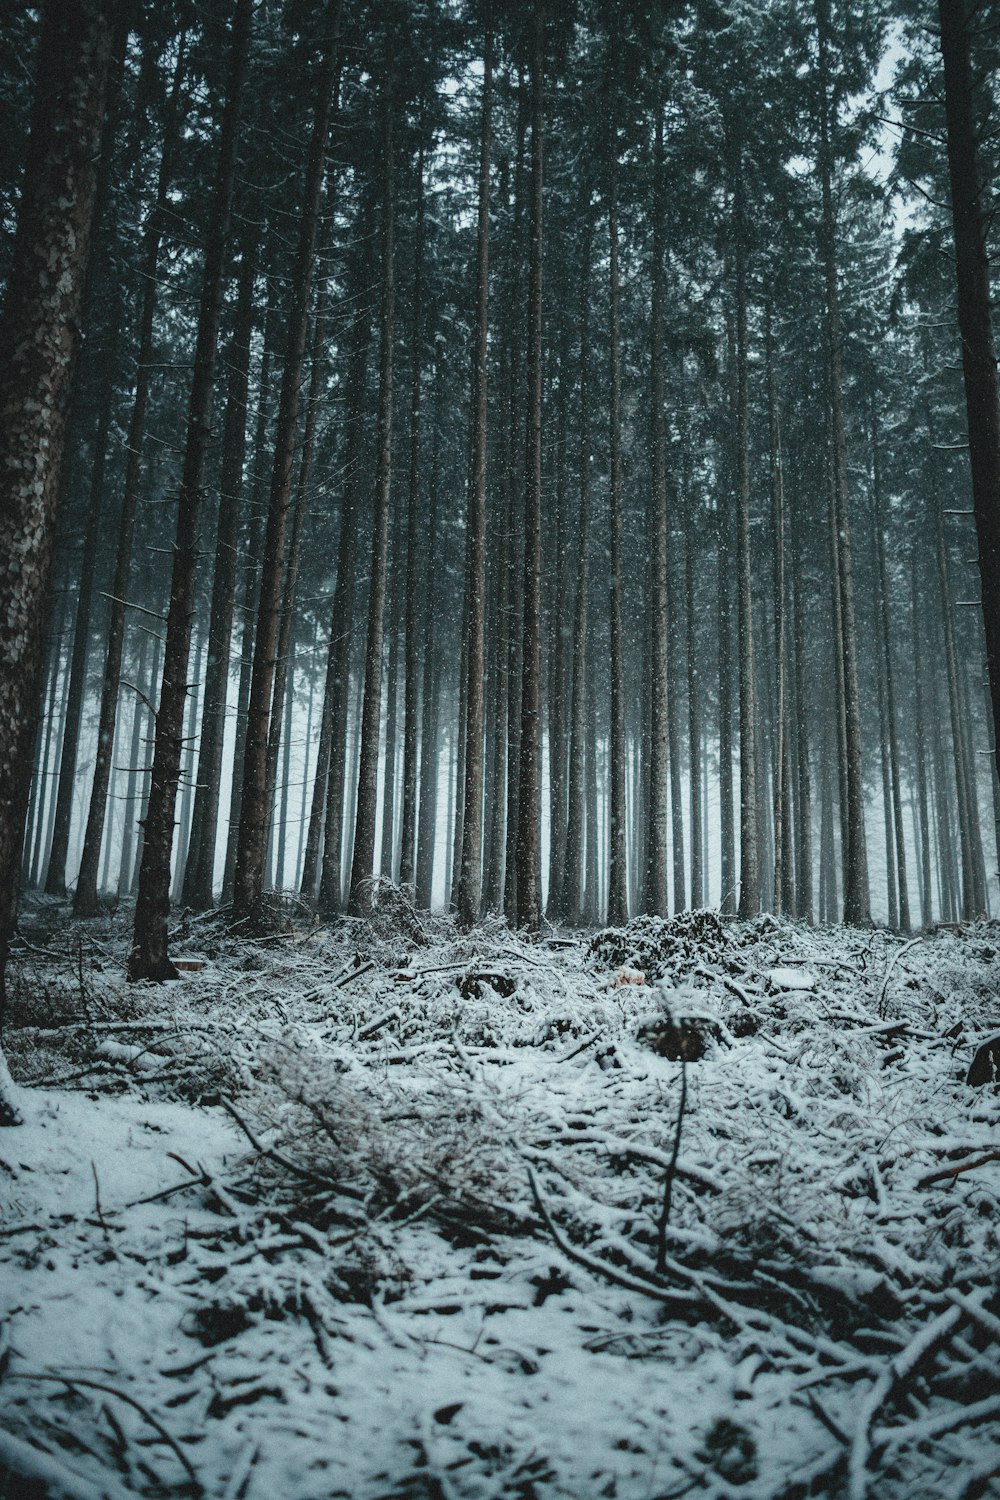 a snowy forest with bare trees